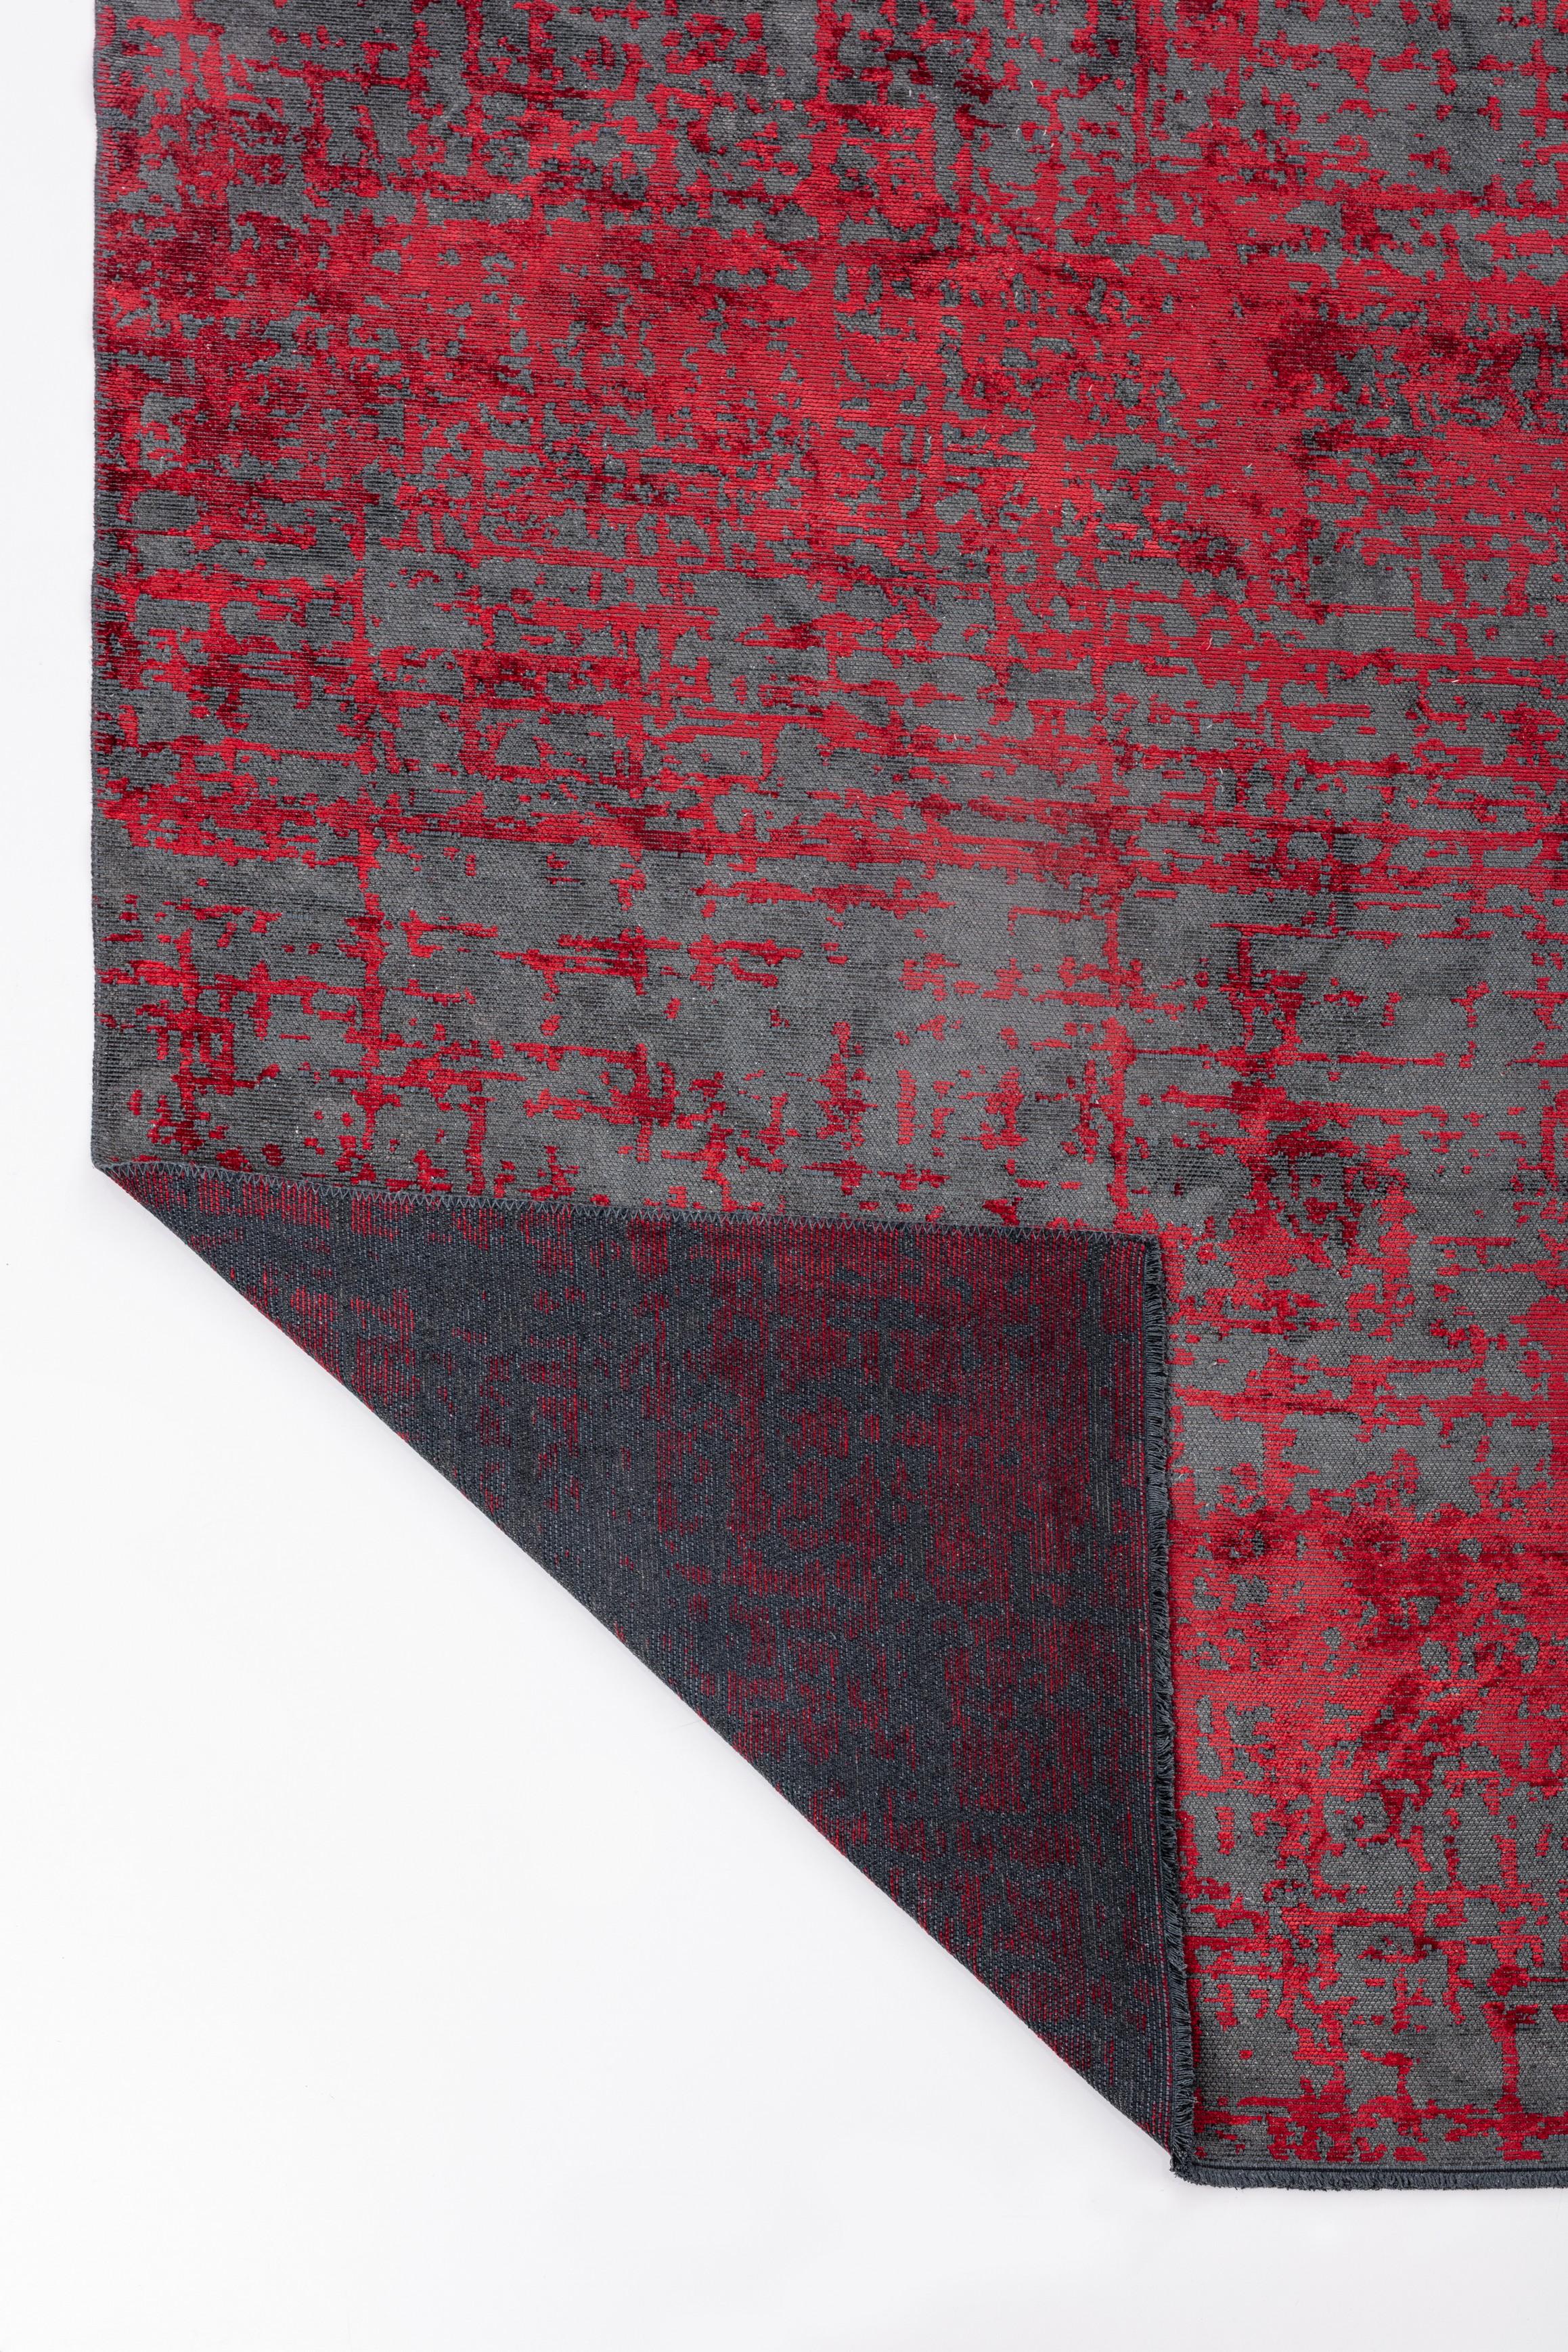 For Sale:  (Red) Modern Abstract Luxury Hand-Finished Area Rug 3